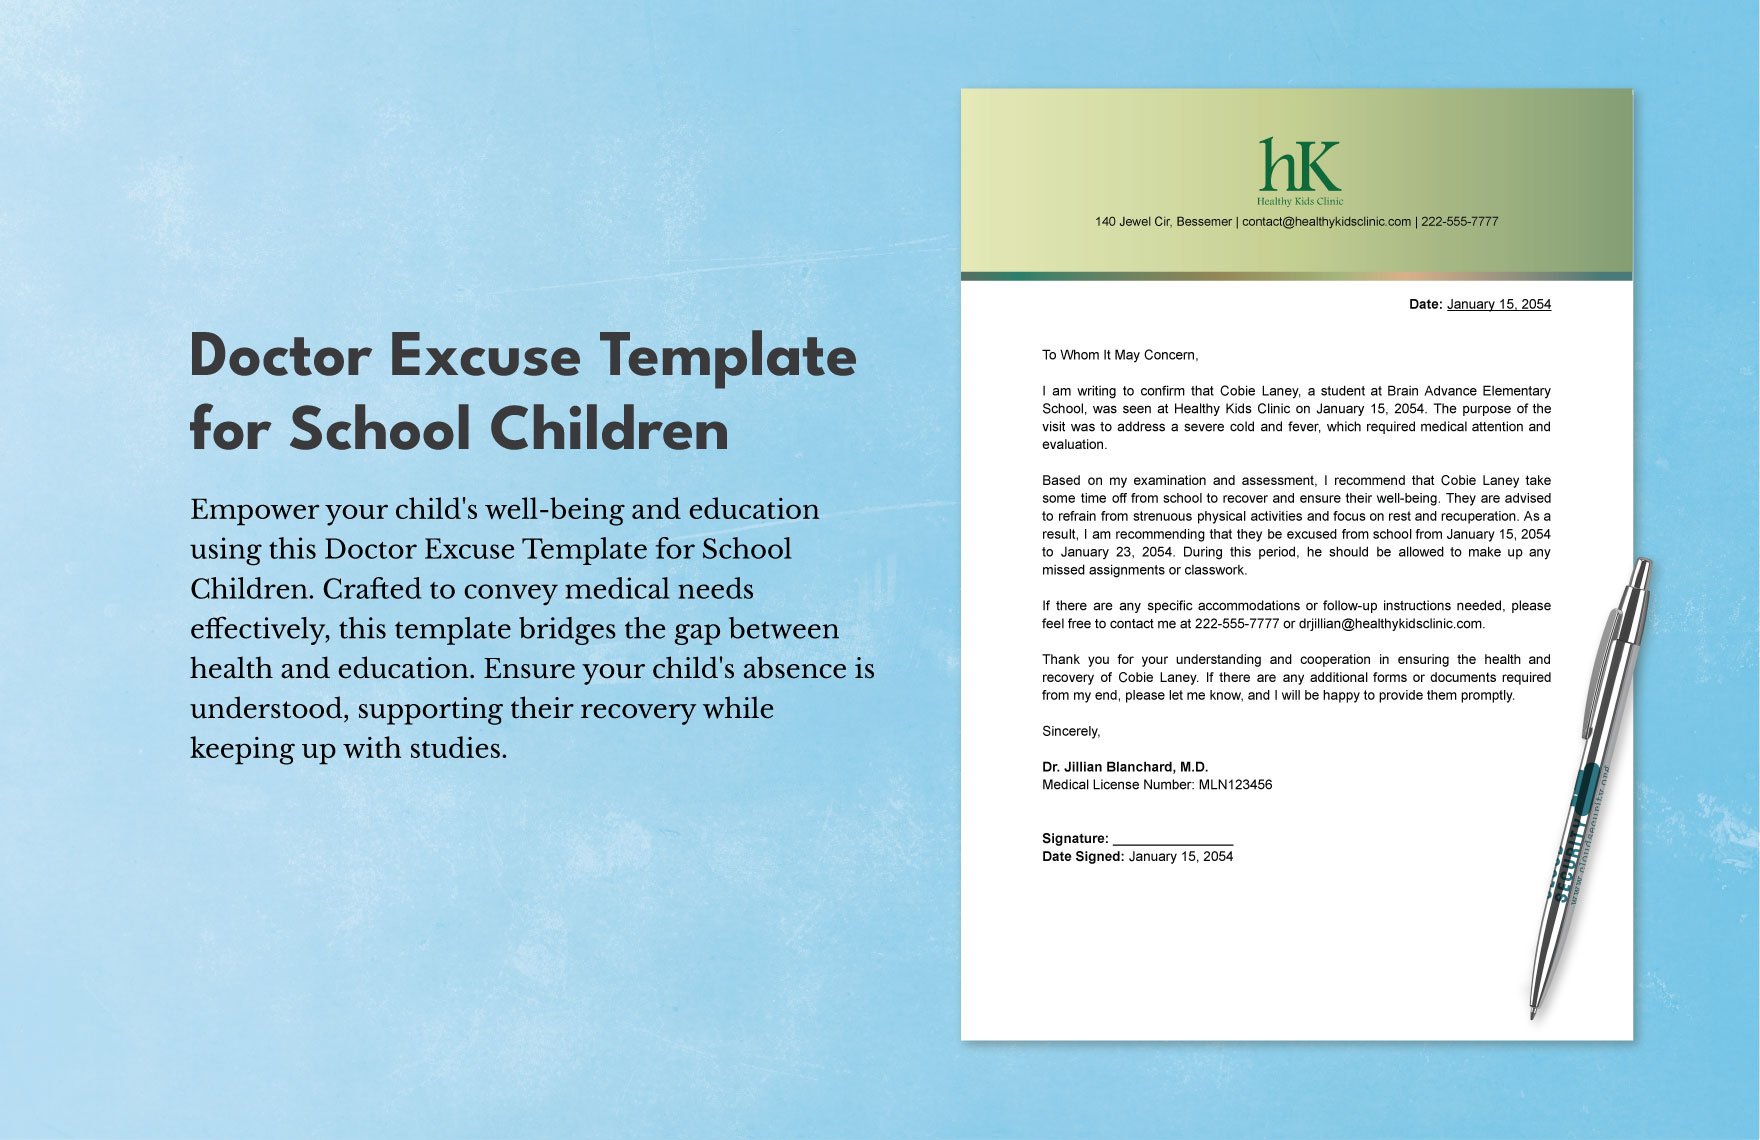 Doctor Excuse Template for School Children